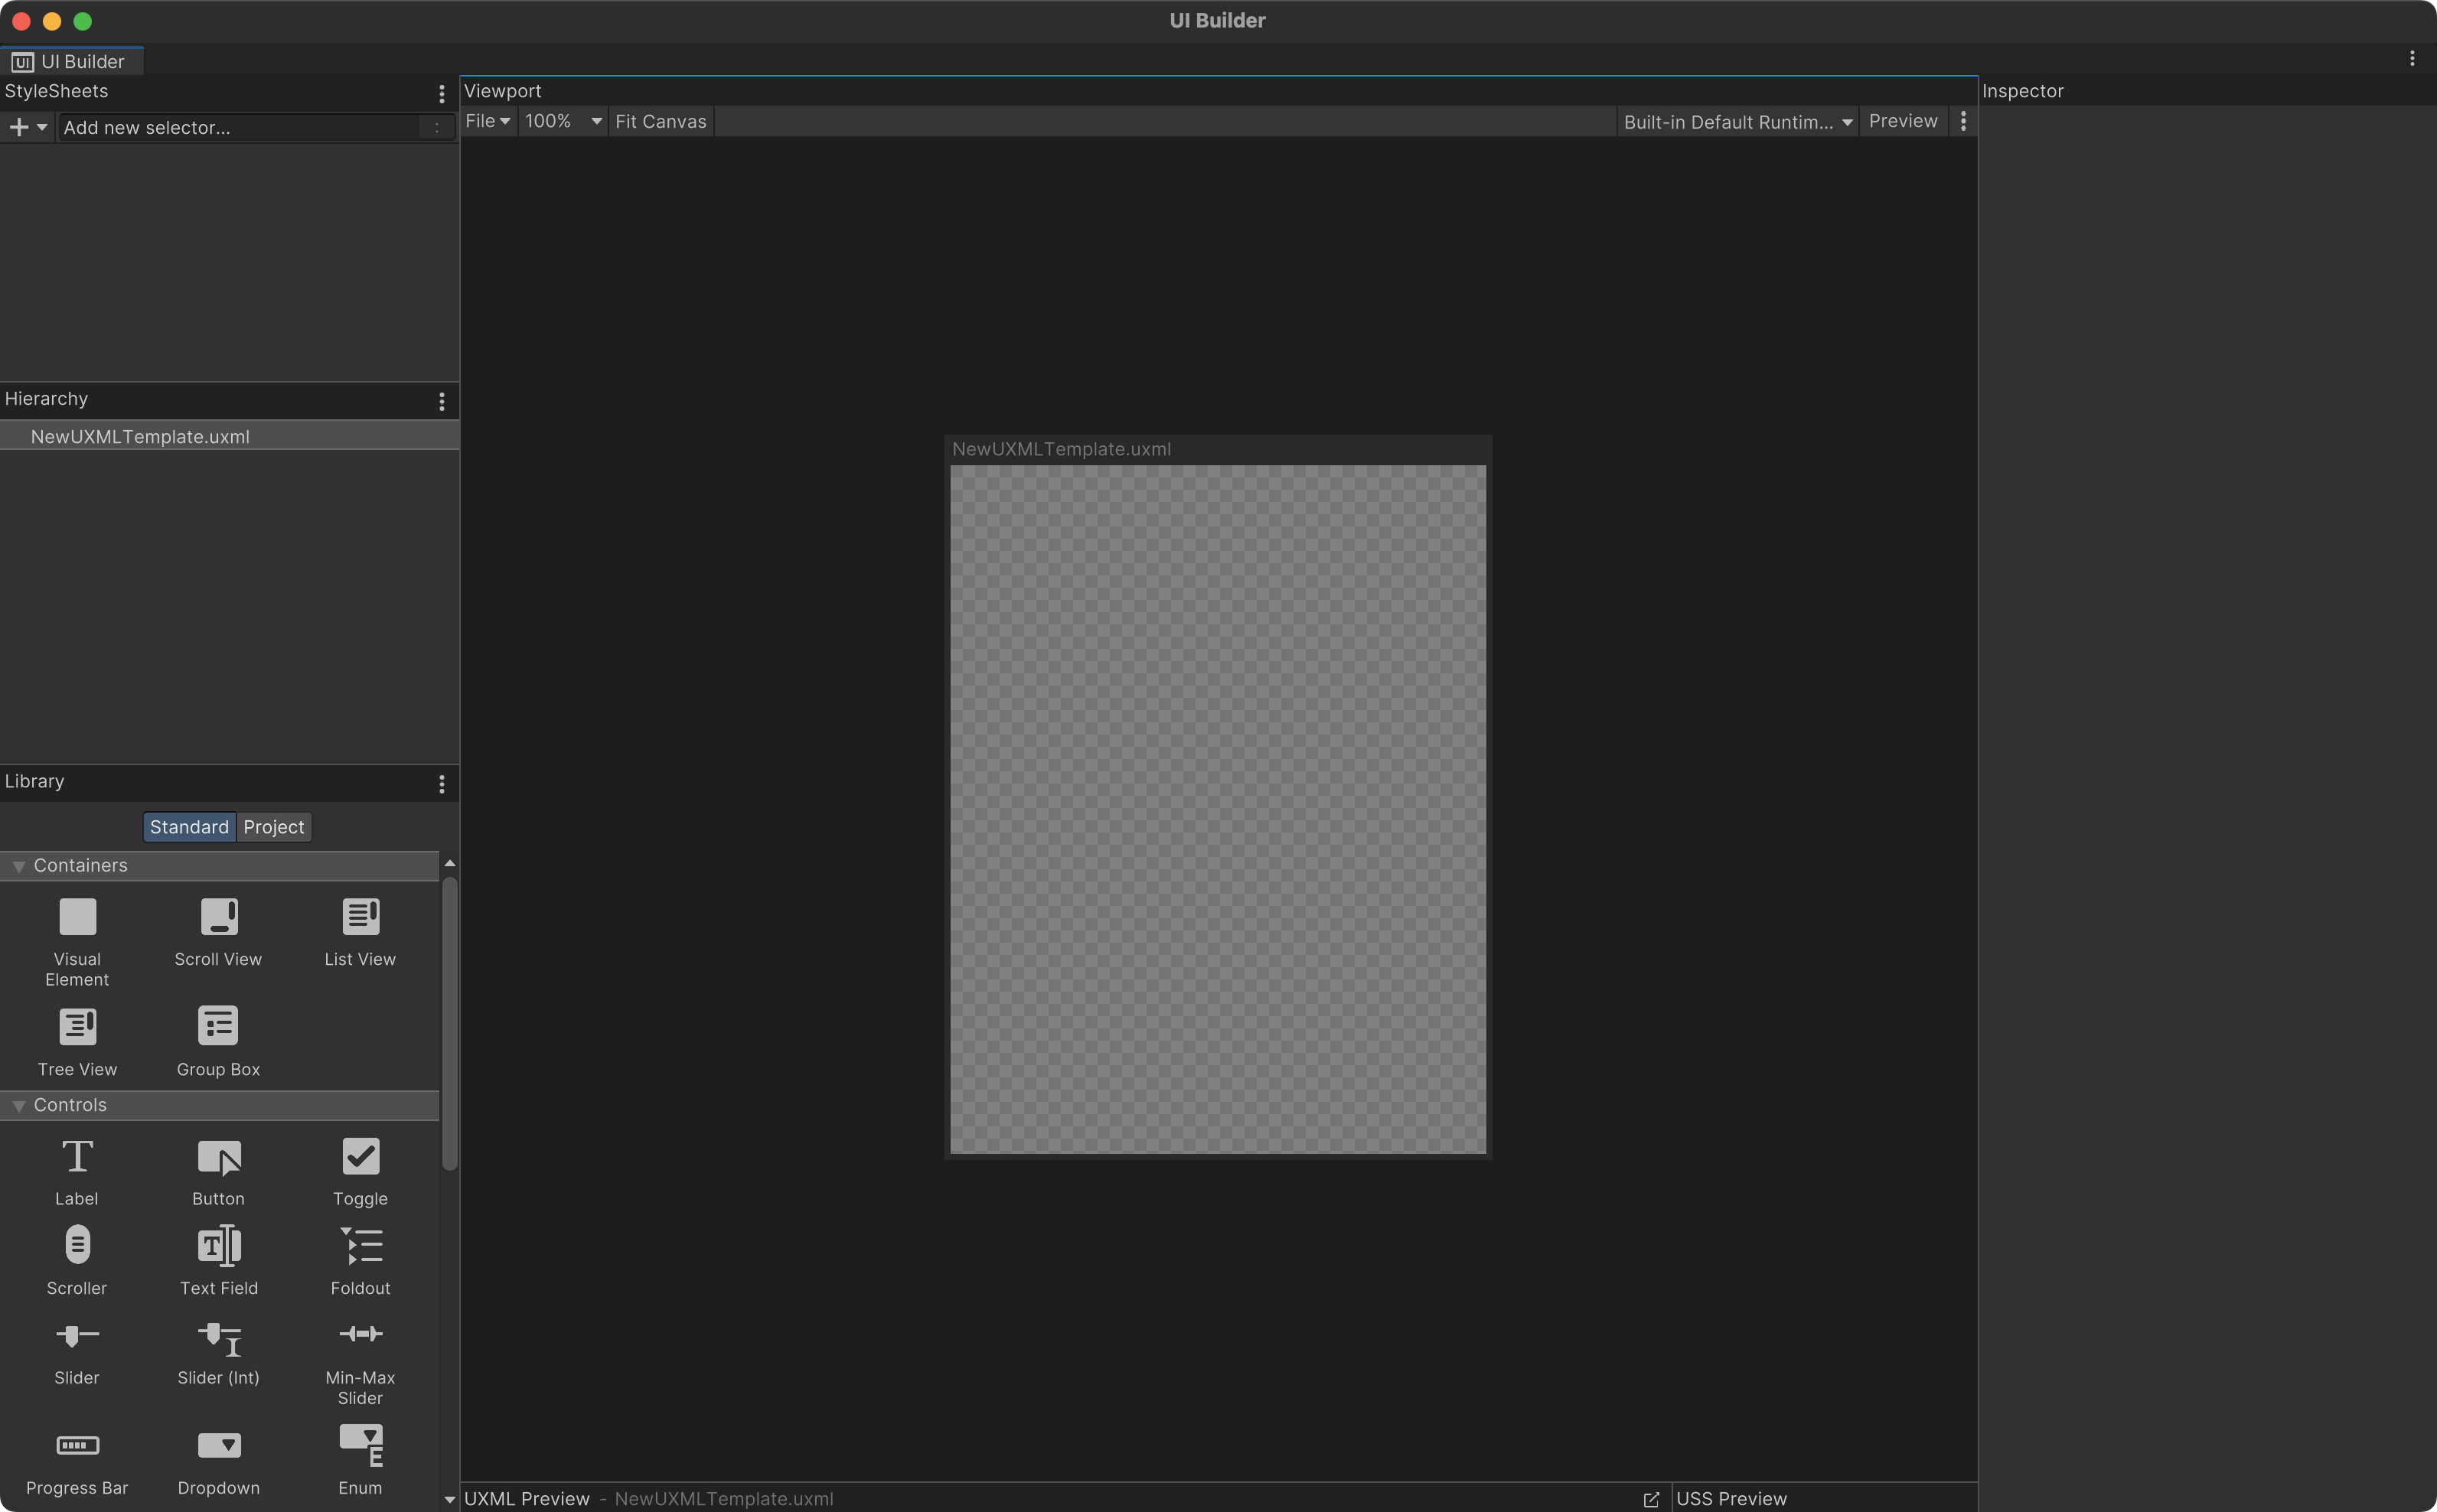 Screenshot of the Unity UI Toolkit UI Builder after a new document is created.